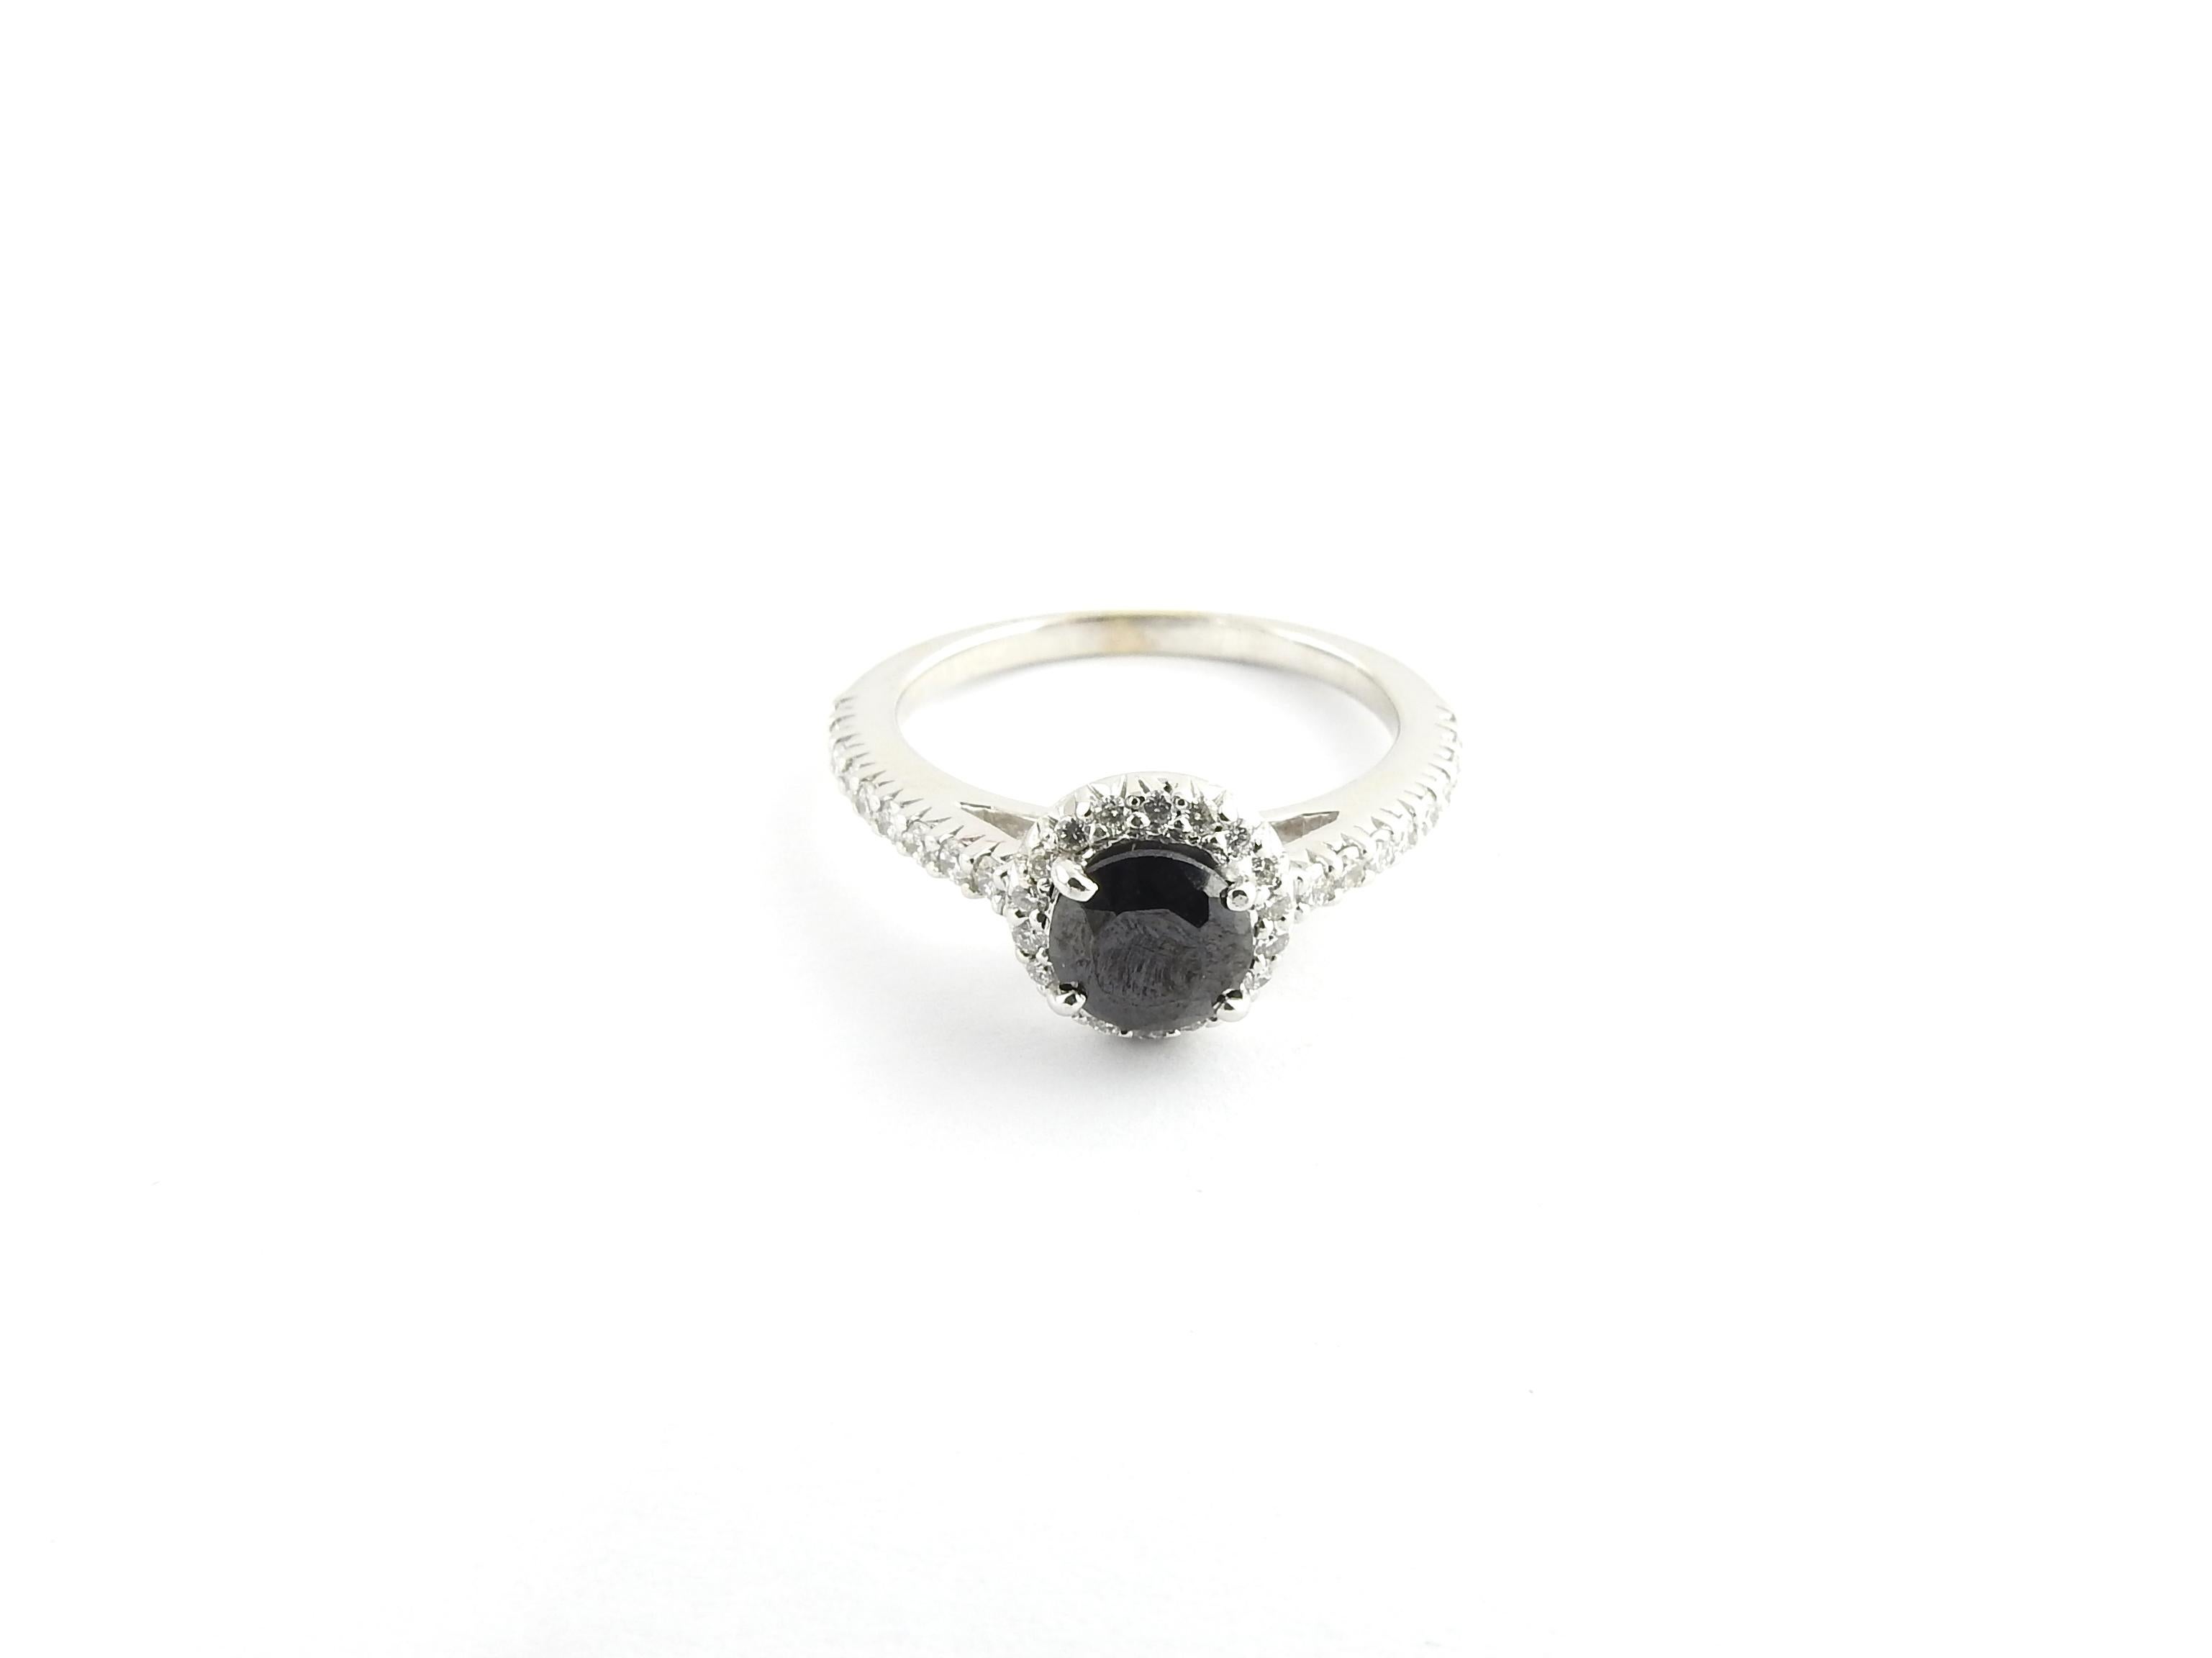 Vintage 14 Karat White Gold Black and White Diamond Ring Size 7-

This elegant ring features one round black diamond (6 mm) approx. .75cts accented with 35 round brilliant cut diamonds approx. .53cts set in classic 14K white gold.  

Top of ring